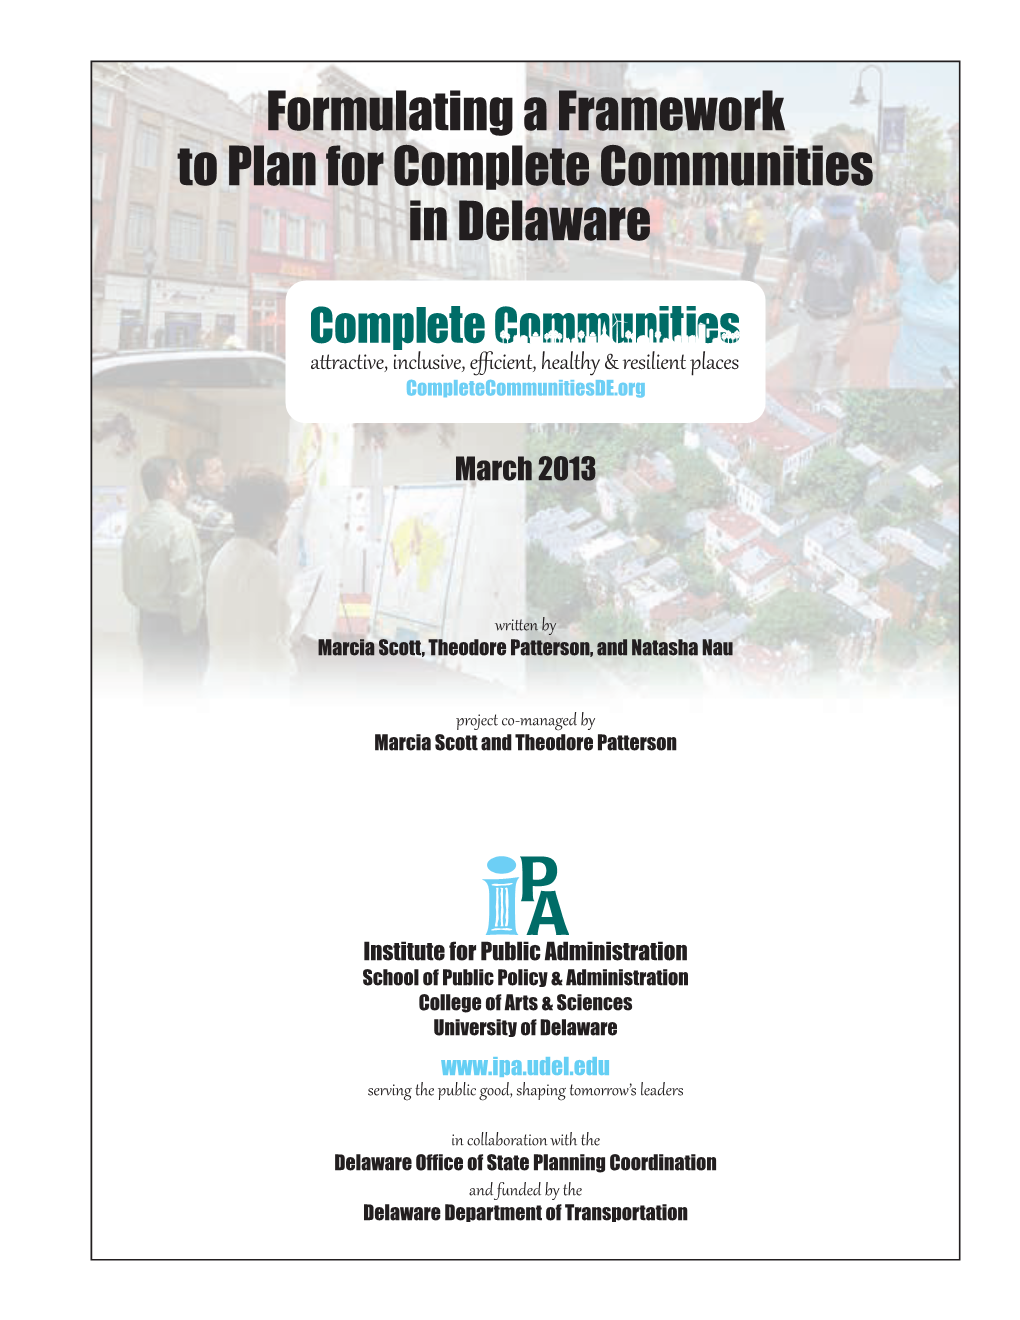 Formulating a Framework to Plan for Complete Communities in Delaware